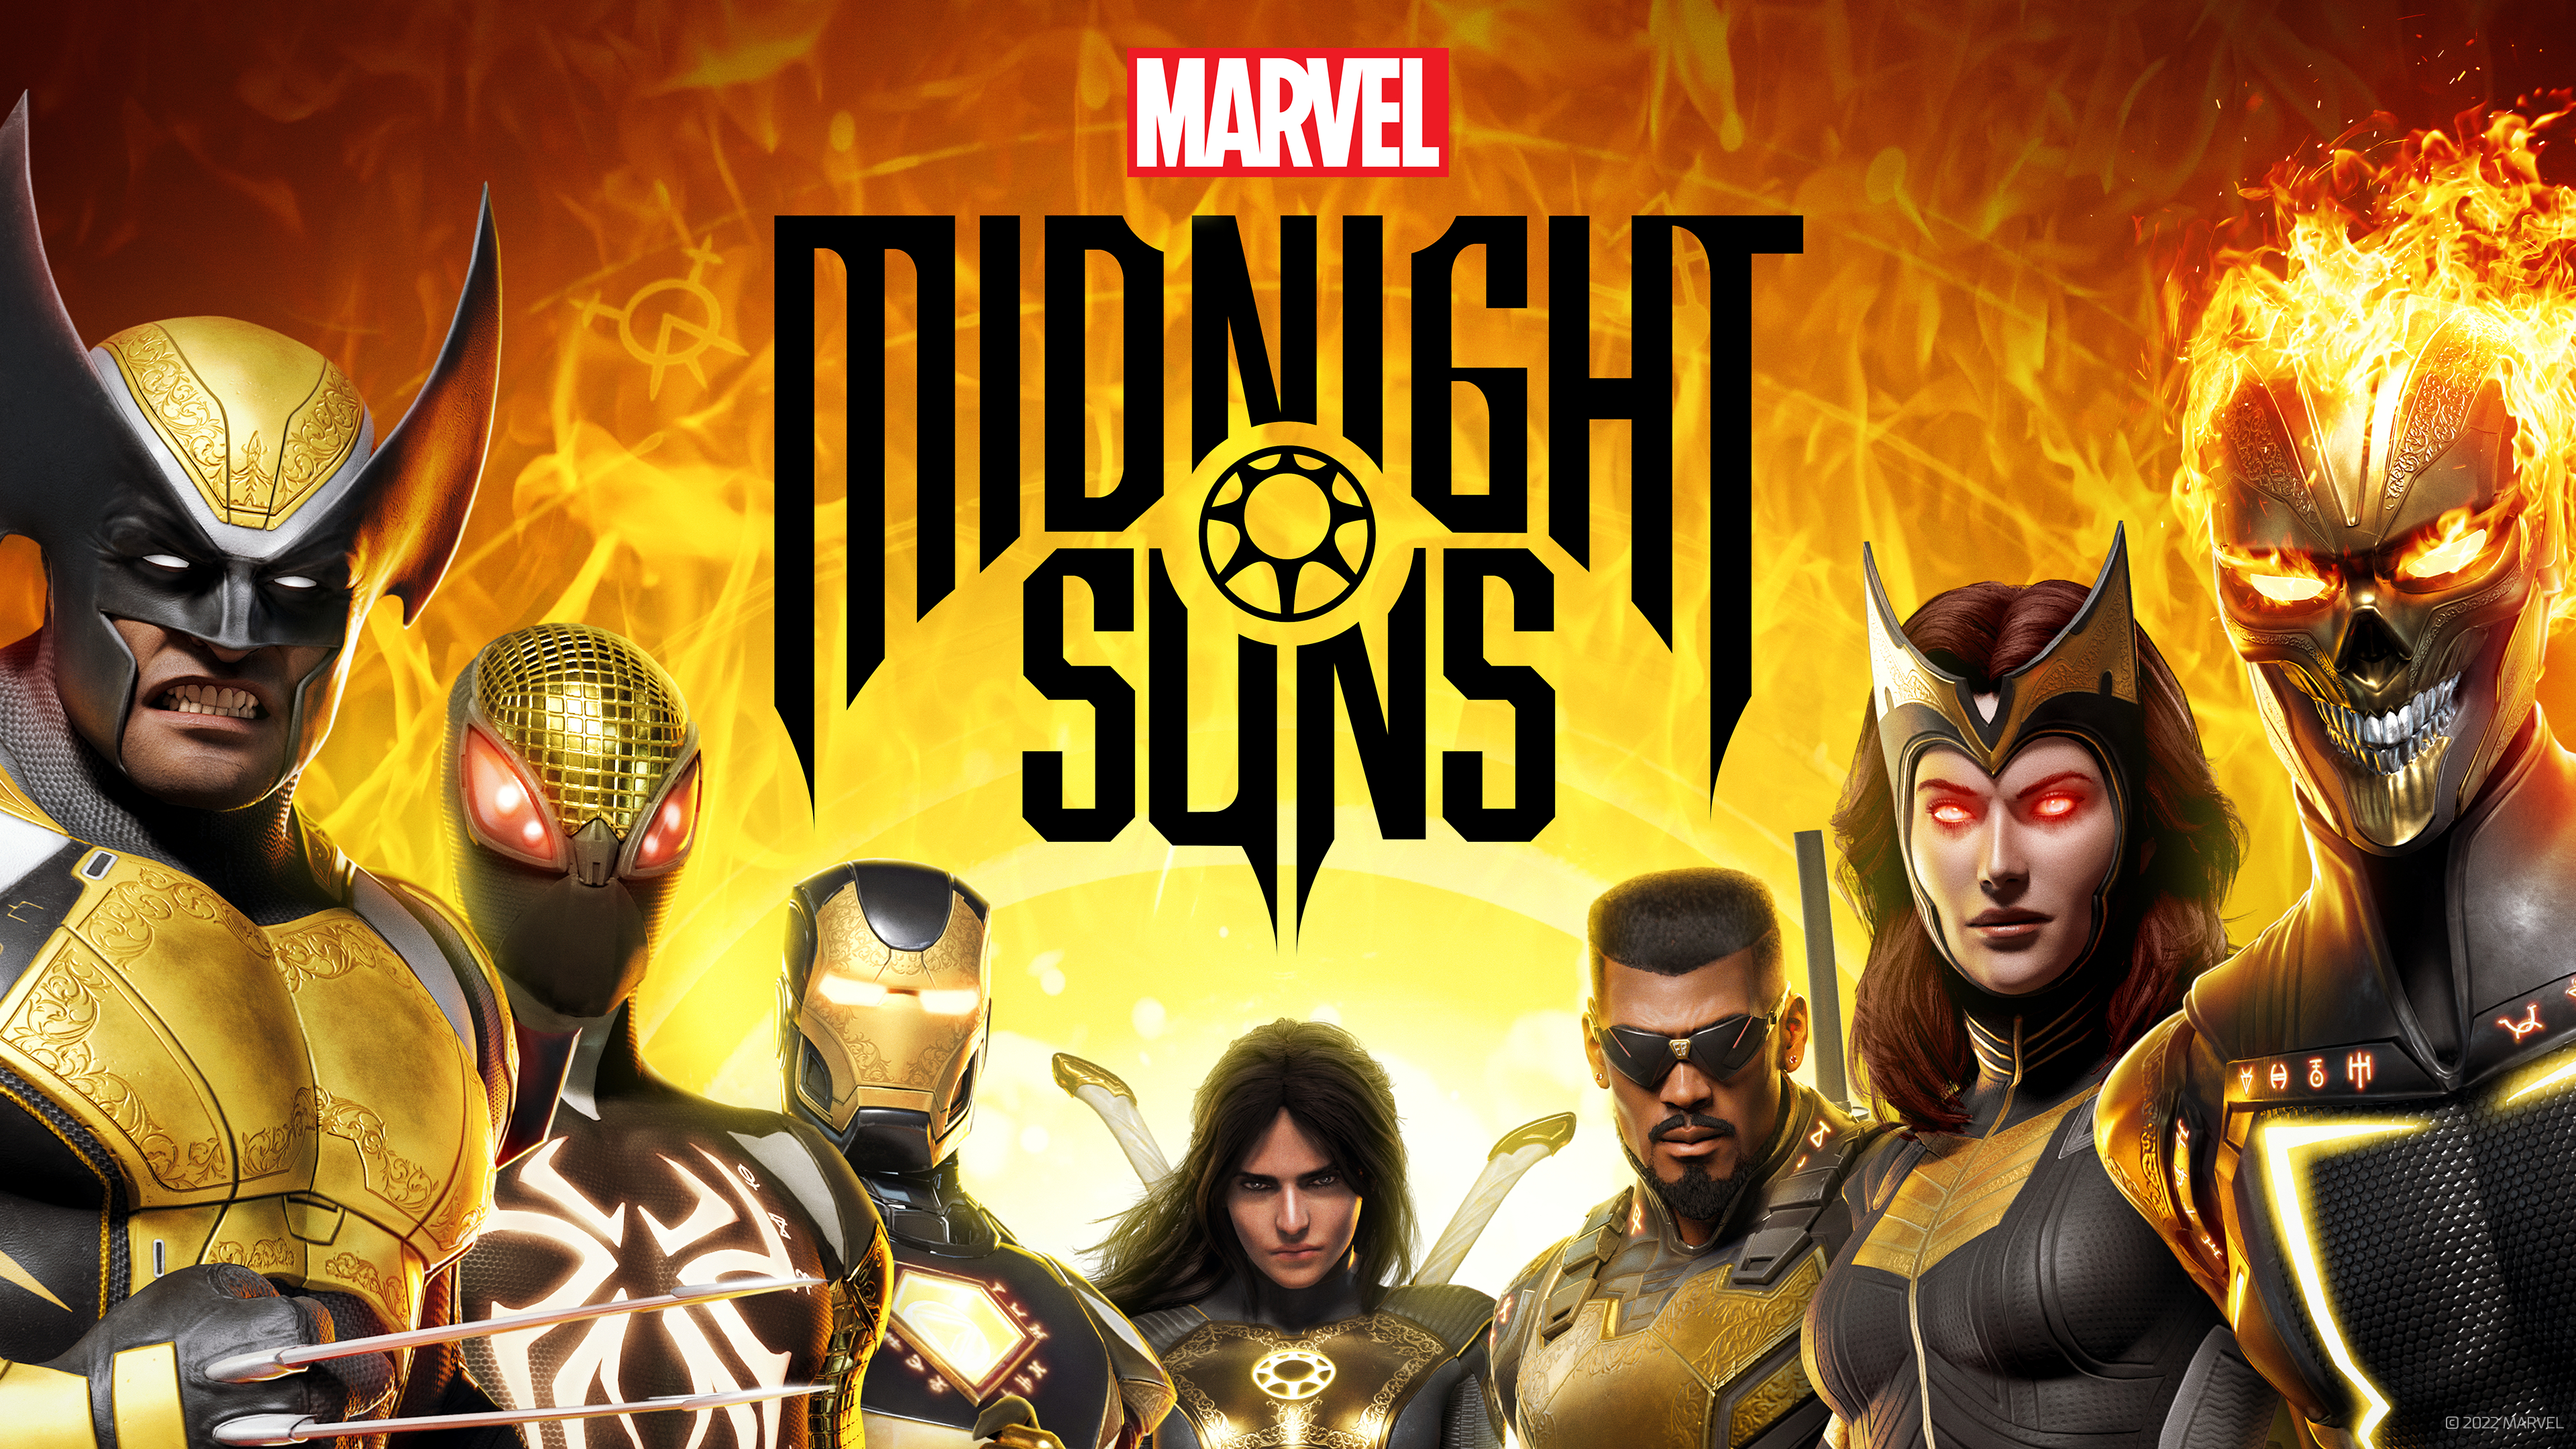 Marvel's Midnight Suns Confirms Four New Characters For Season Pass